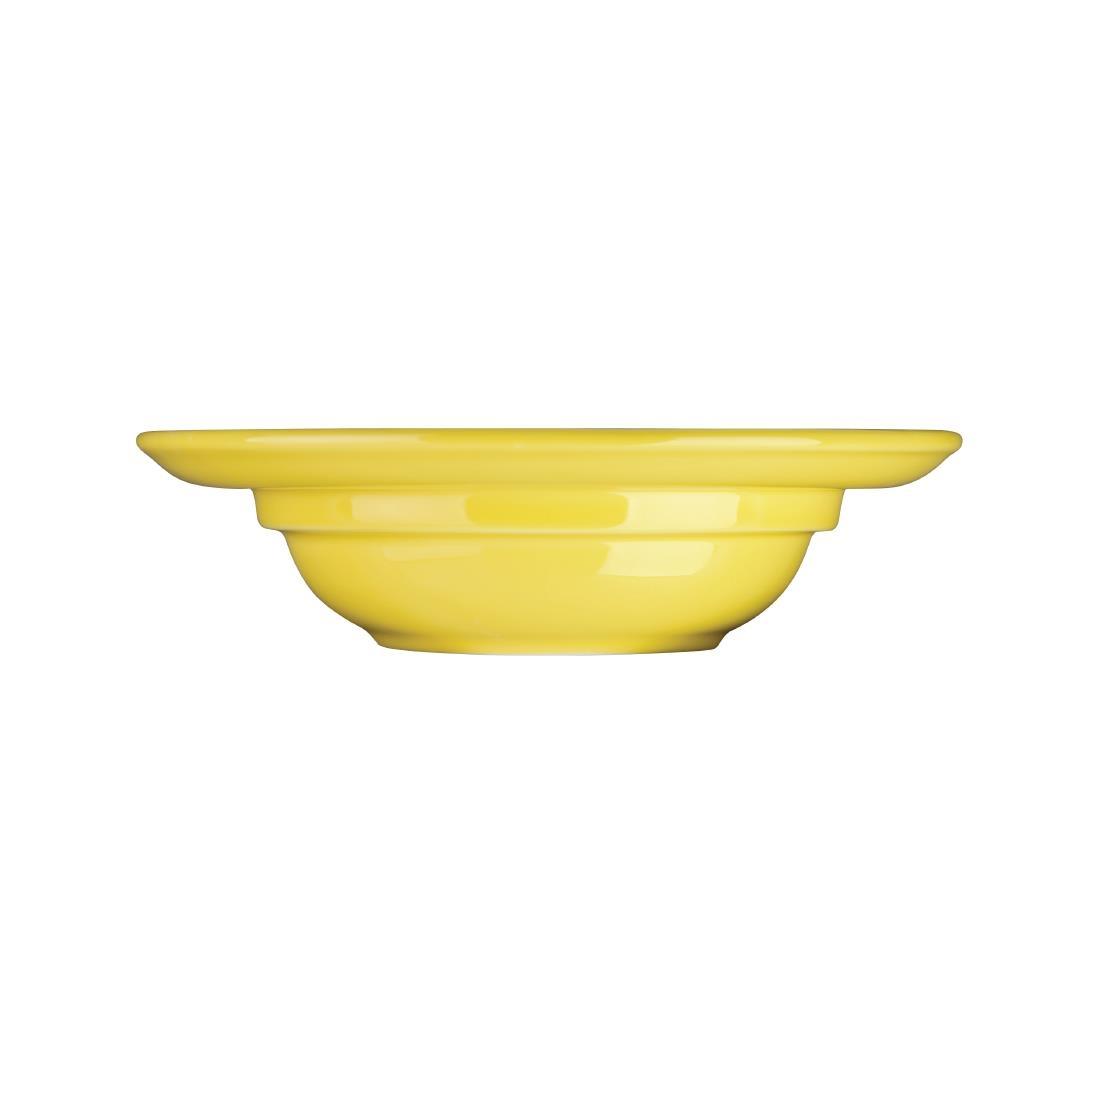 Olympia Heritage Raised Rim Bowls Yellow 205mm (Pack of 4) - DW148  - 3